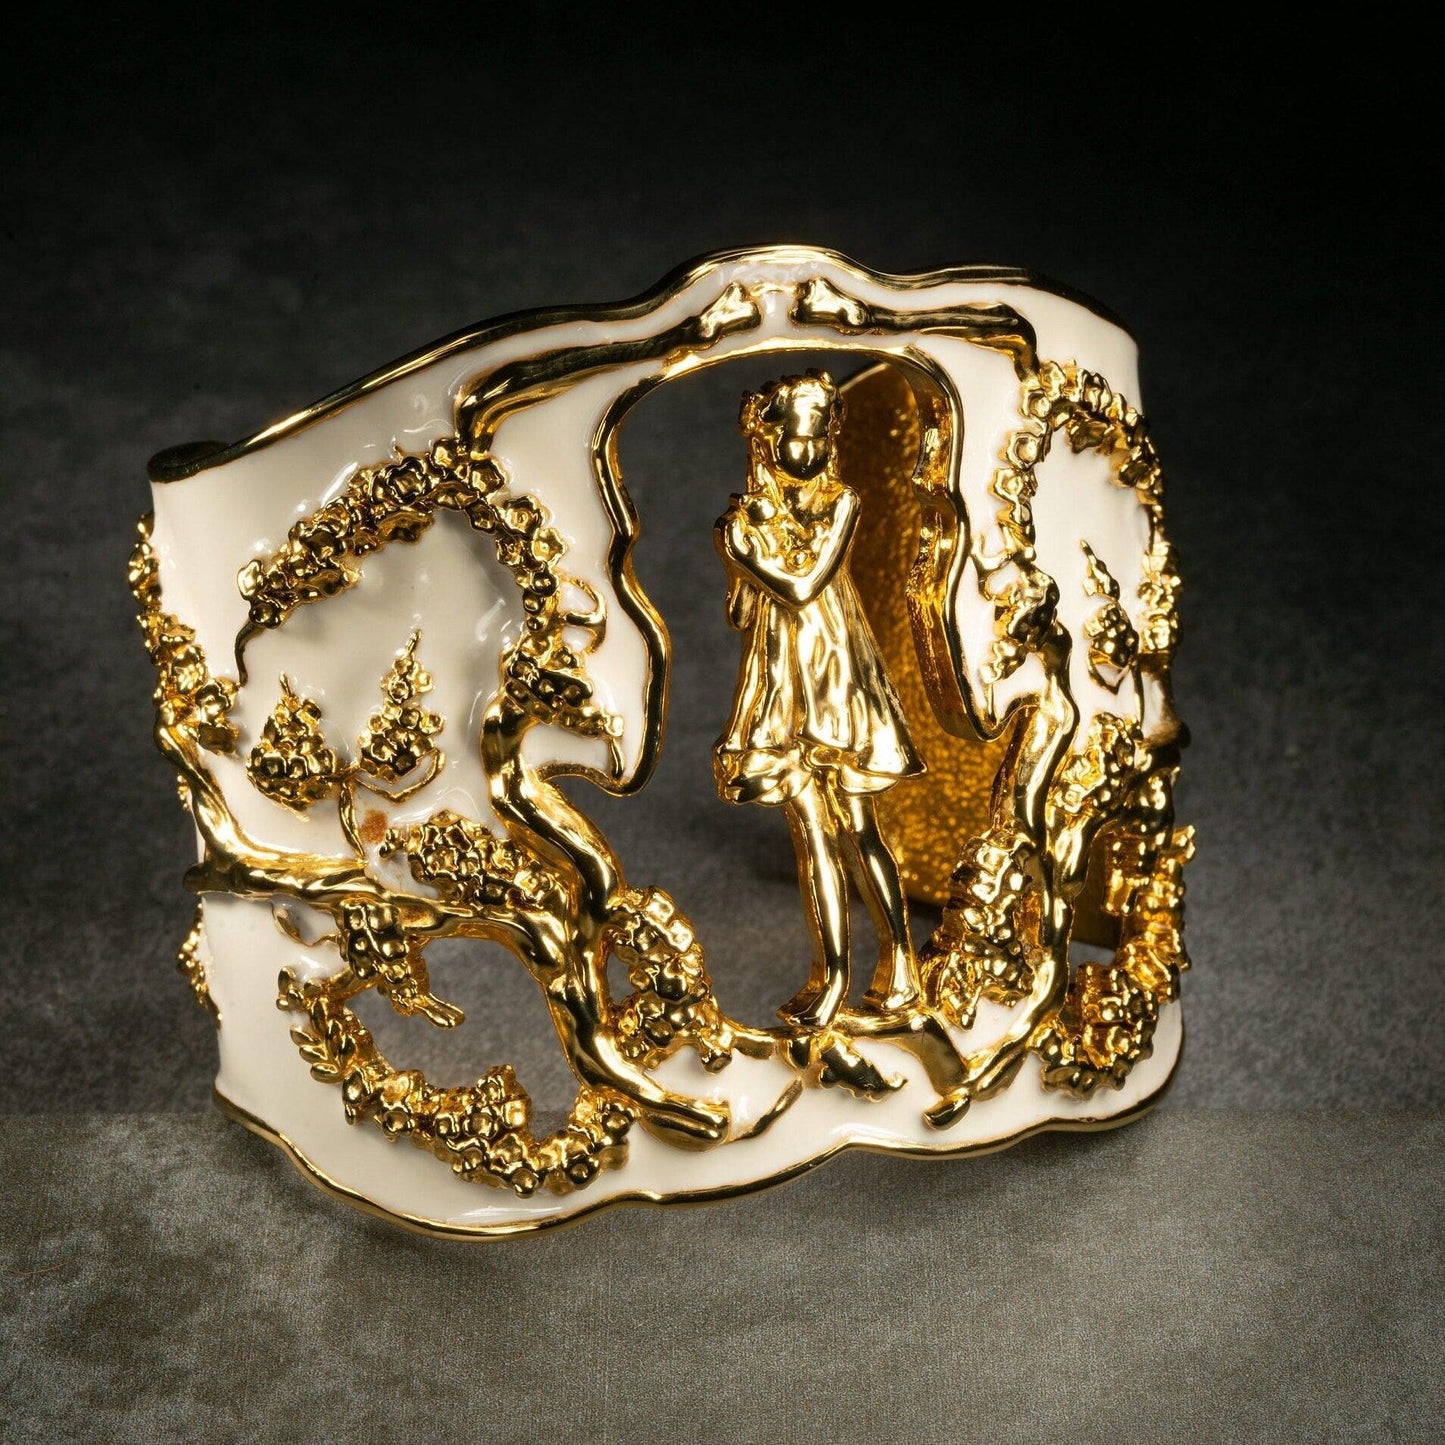 Unique Cuff Bracelet "Harmony" - Gold & Ivory Gift, Gift For Mom, Artistic, Jewelry Cuff, Bracelet, Gold, Silver, Brass